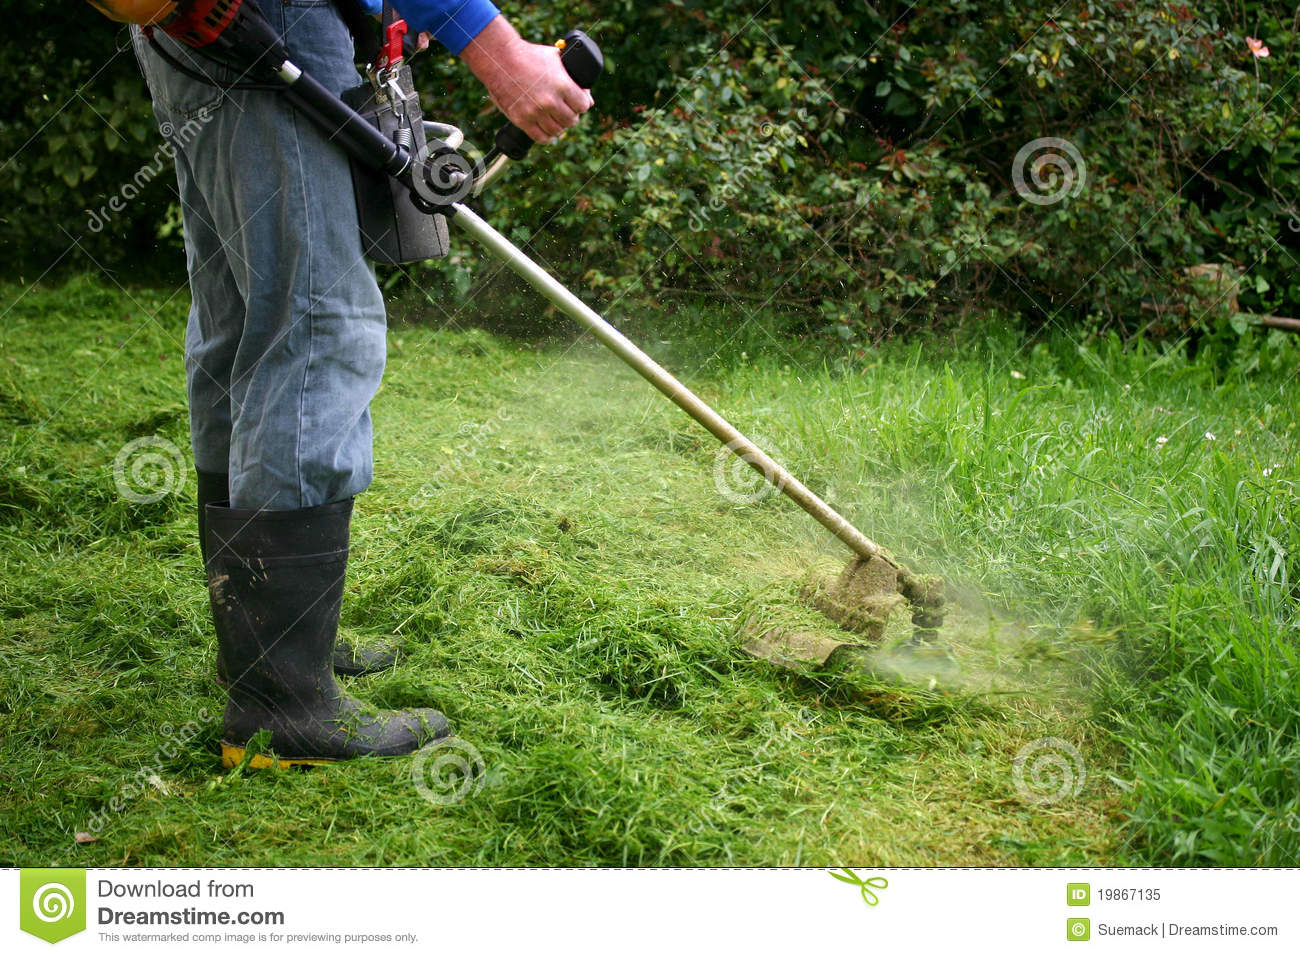 Weedeating An Overgrown Lawn Royalty Free Stock Photo   Image